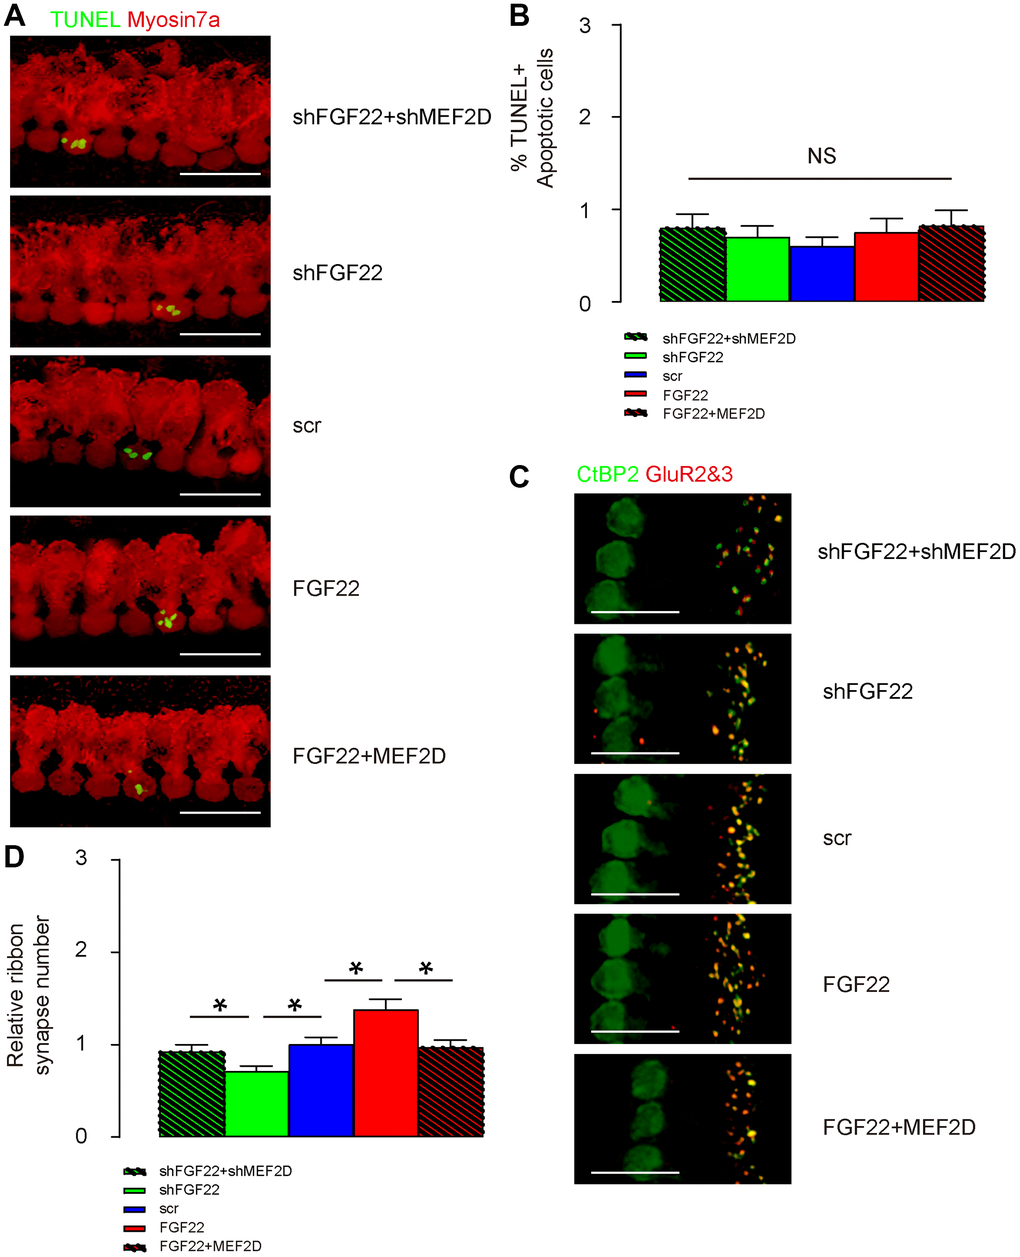 FGF22 depletion reduces ribbon synapse number in vivo. AAV-shFGF22 and AAV-FGF22 were administrated to mouse cochlea to deplete or overexpress FGF22 in hair cells, respectively. Co-administration of AAV-shMEF2D with AAV-shFGF22 was also performed to assess the regulatory relationship between FGF22 and MEF2D in hair cells and ribbon synapses. Similarly, co-administration of AAV-MEF2D with AAV-FGF22 was performed, also to assess the regulatory relationship between FGF22 and MEF2D in hair cells and ribbon synapses. (A, B) TUNEL staining was performed on cochlea, showing by representative images (A), and by quantification (B). (C, D) The ribbon synapses were determined by co-staining for CtBP2 (in green) and GluR2&3 (in red). Cochlear ribbon synapse number was assessed, shown by representative images (C), and by quantification (D). *p